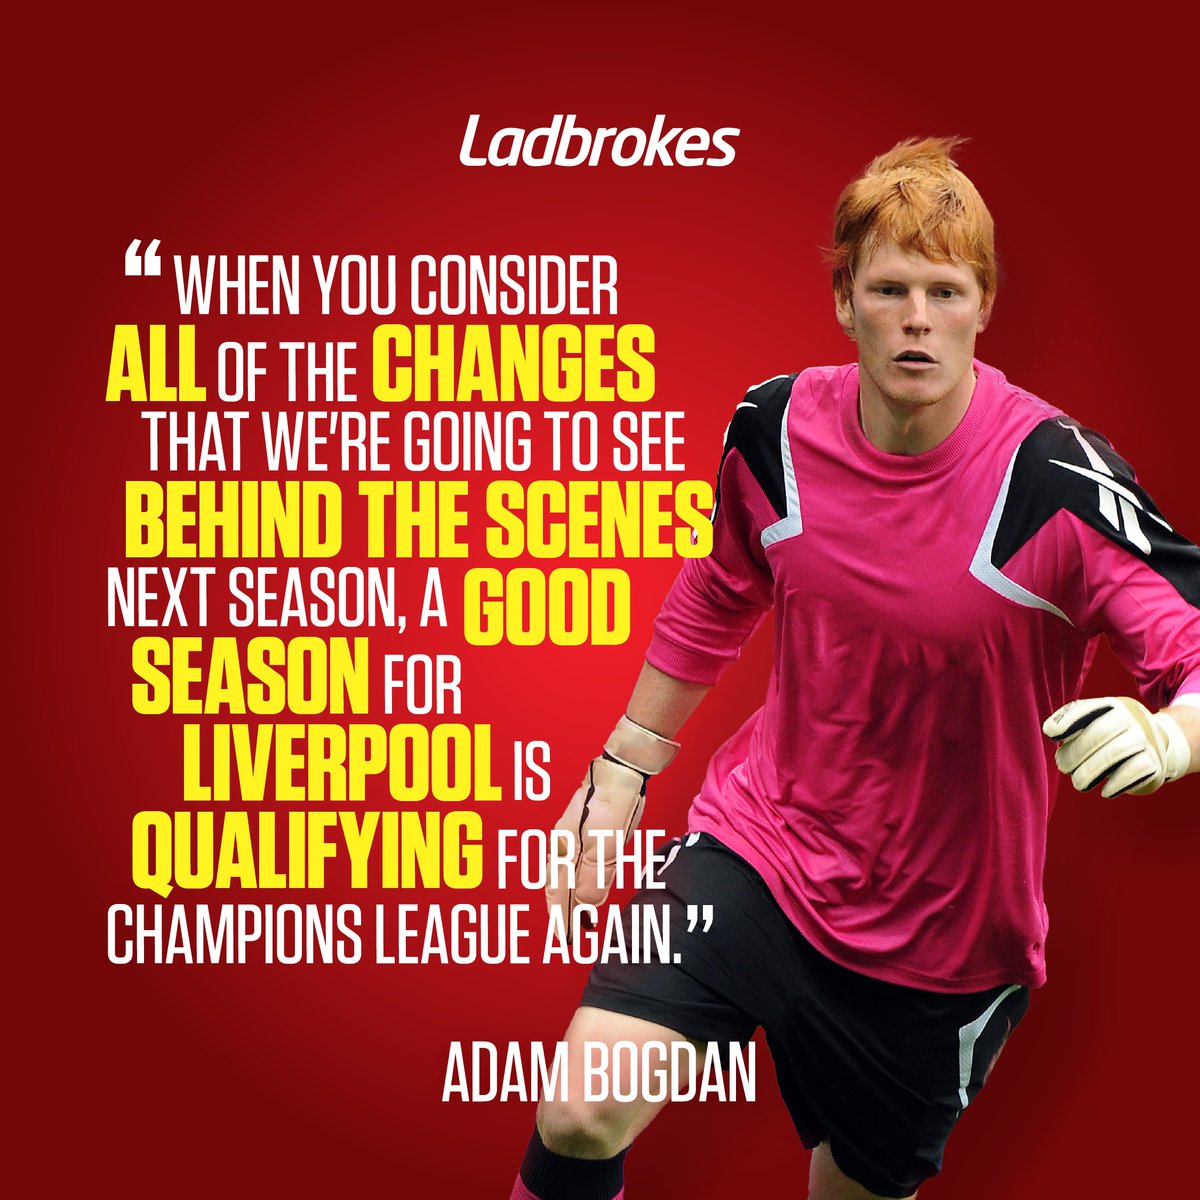 Should Liverpool be satisfied with a top four finish next season? Or should they be aiming higher? #Ladbrokes